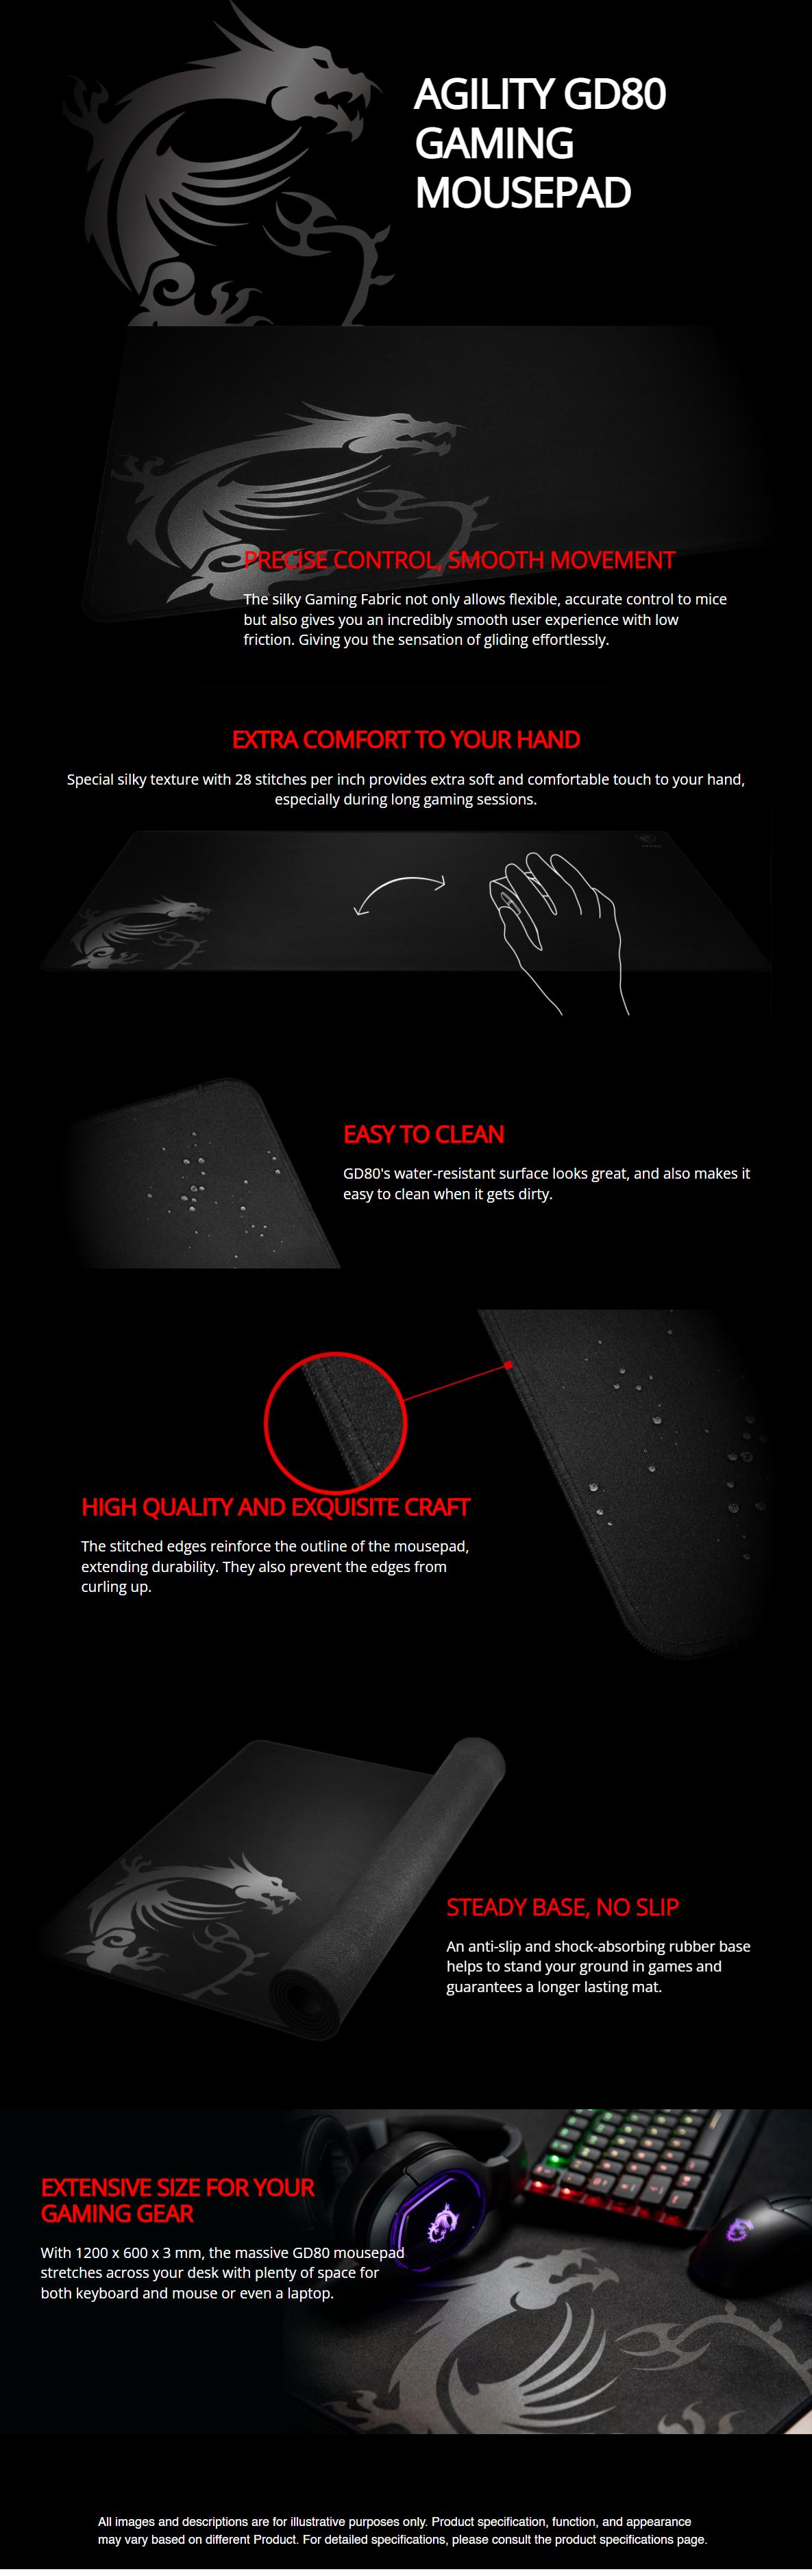 A large marketing image providing additional information about the product MSI Agility GD80 Mousemat - Additional alt info not provided